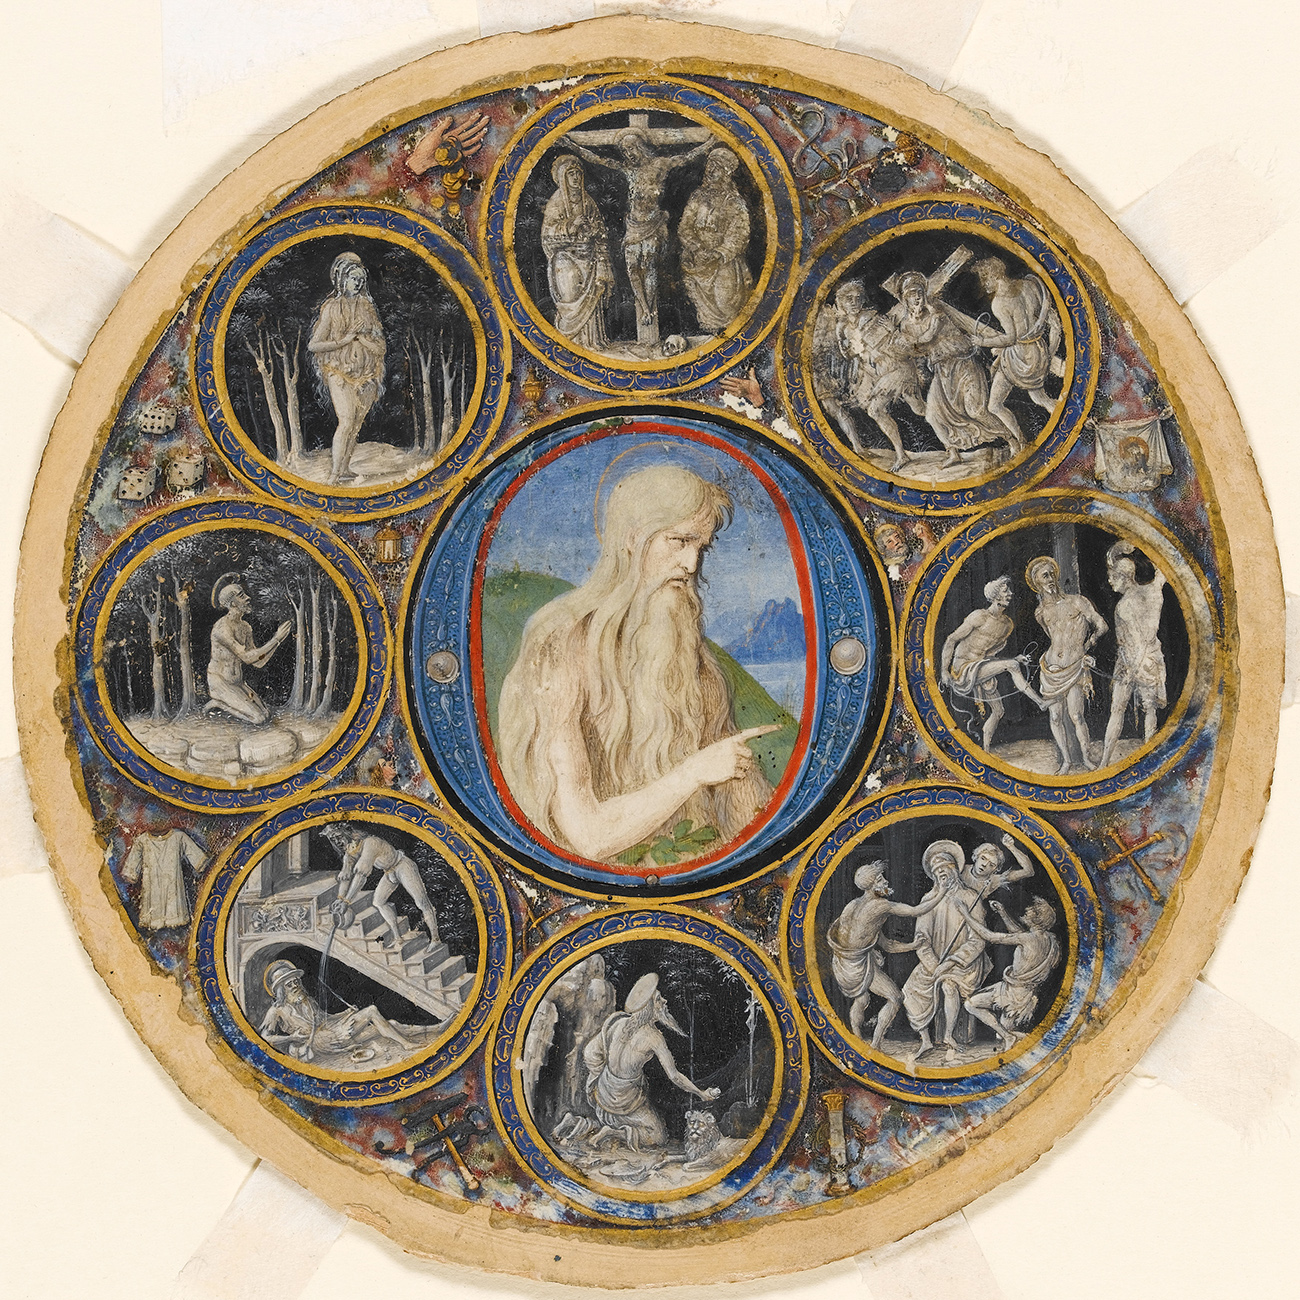 Historiated initial mounted within a roundel with medallion scenes, John the Baptist, Hermit Saints and scenes of Christ’s Passion. Bologna, Parma, Italy, 1490-­?1500 © The Fitzwilliam Museum, Cambridge